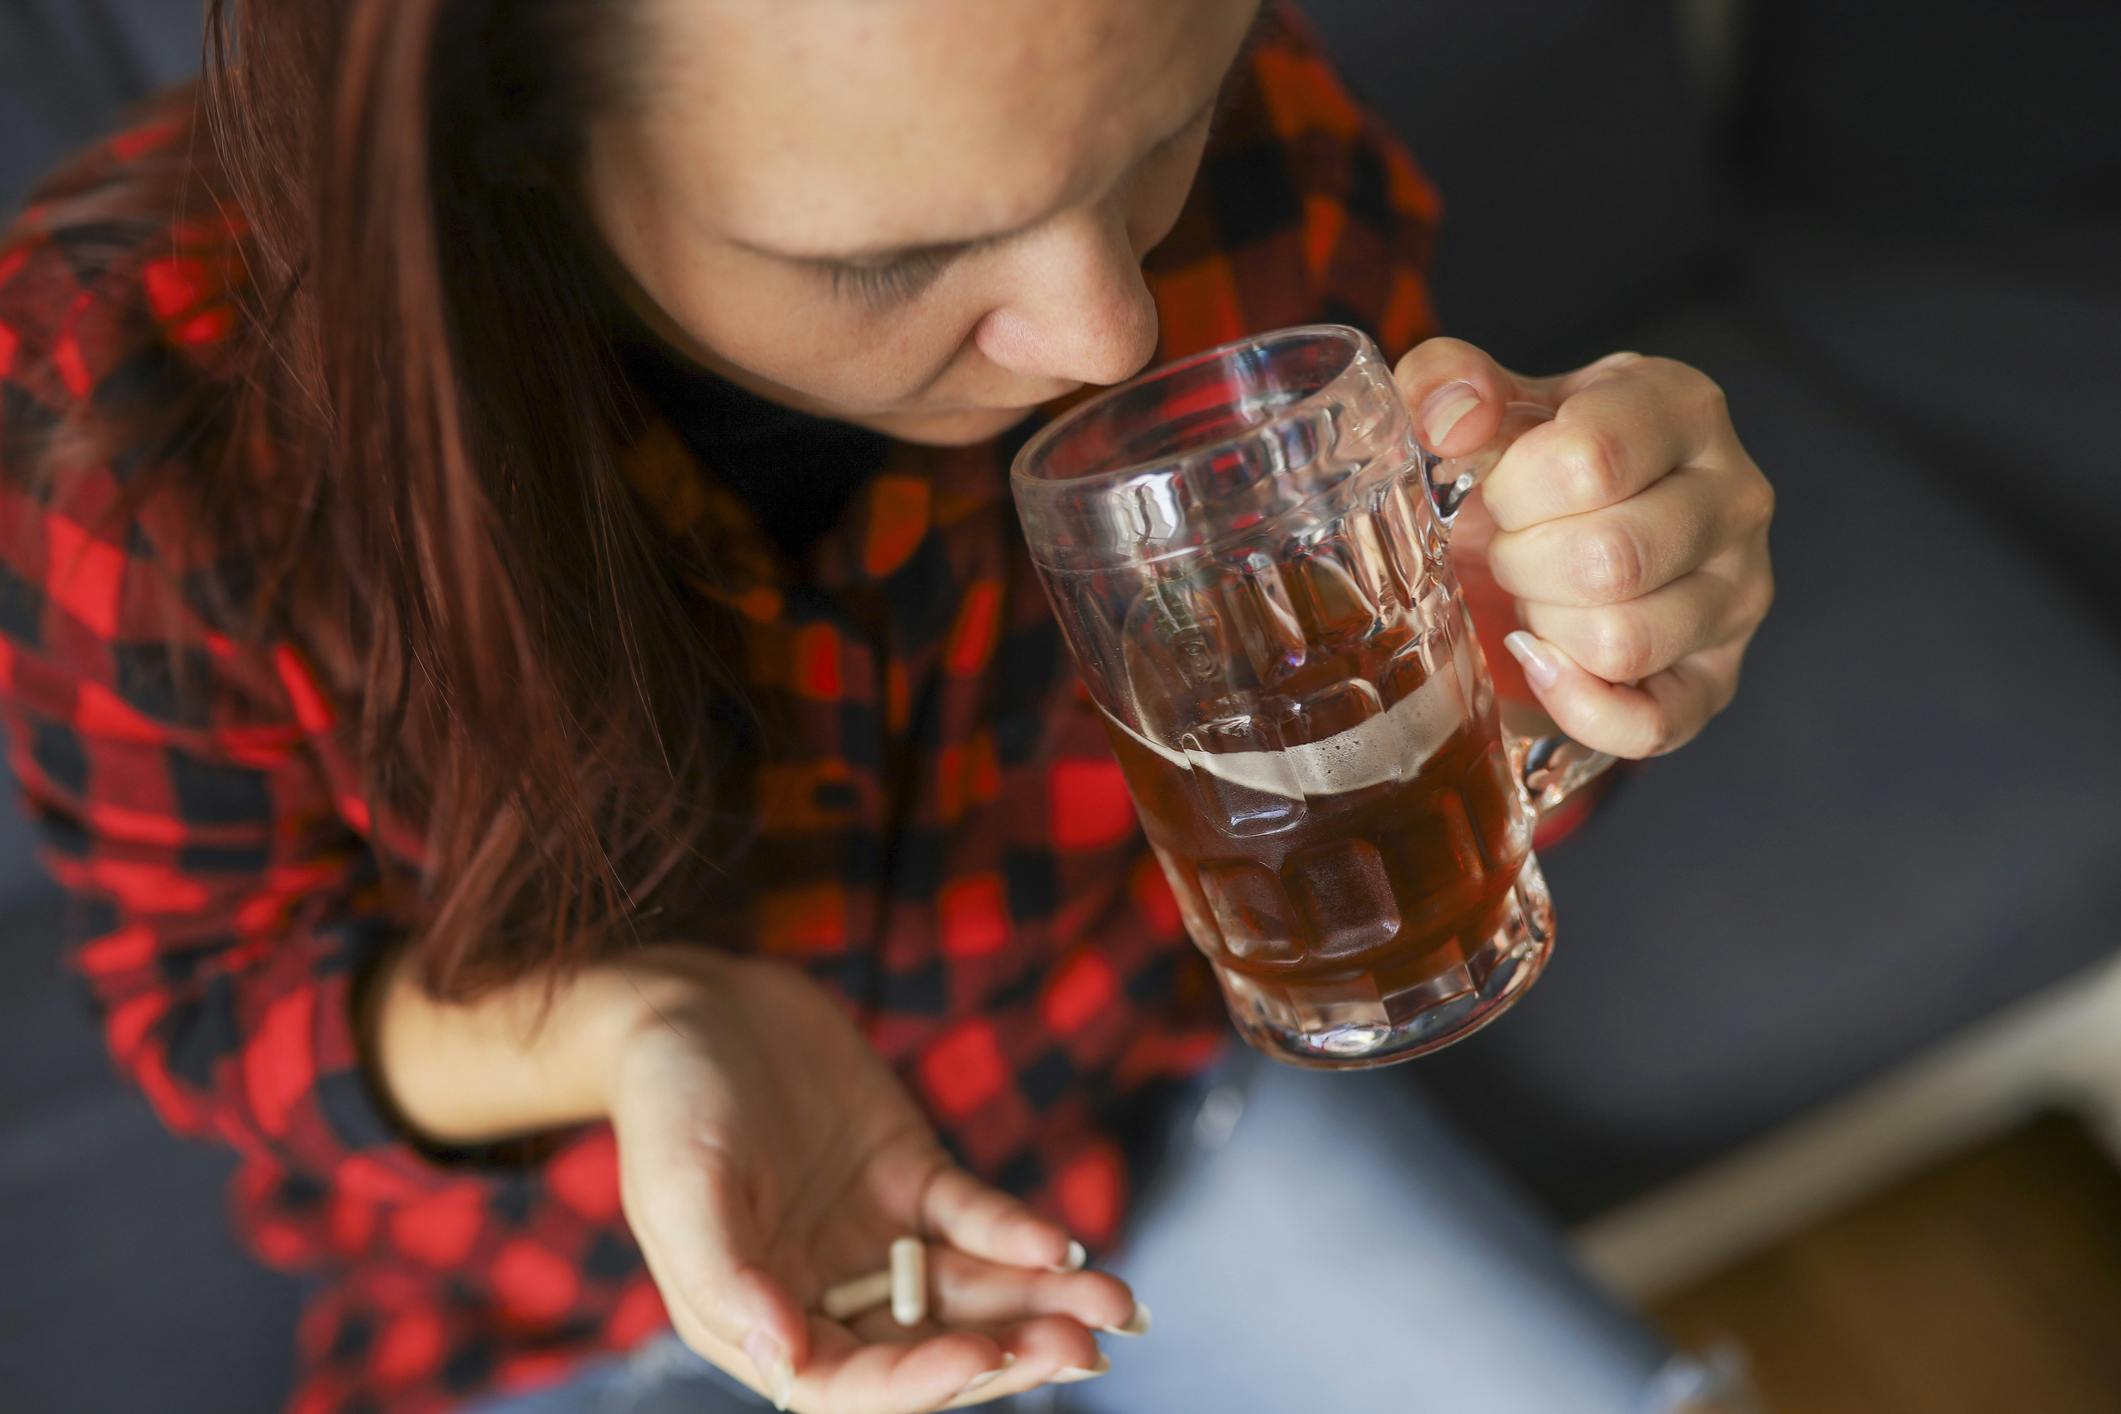 young woman drinking beer and taking concerta pill